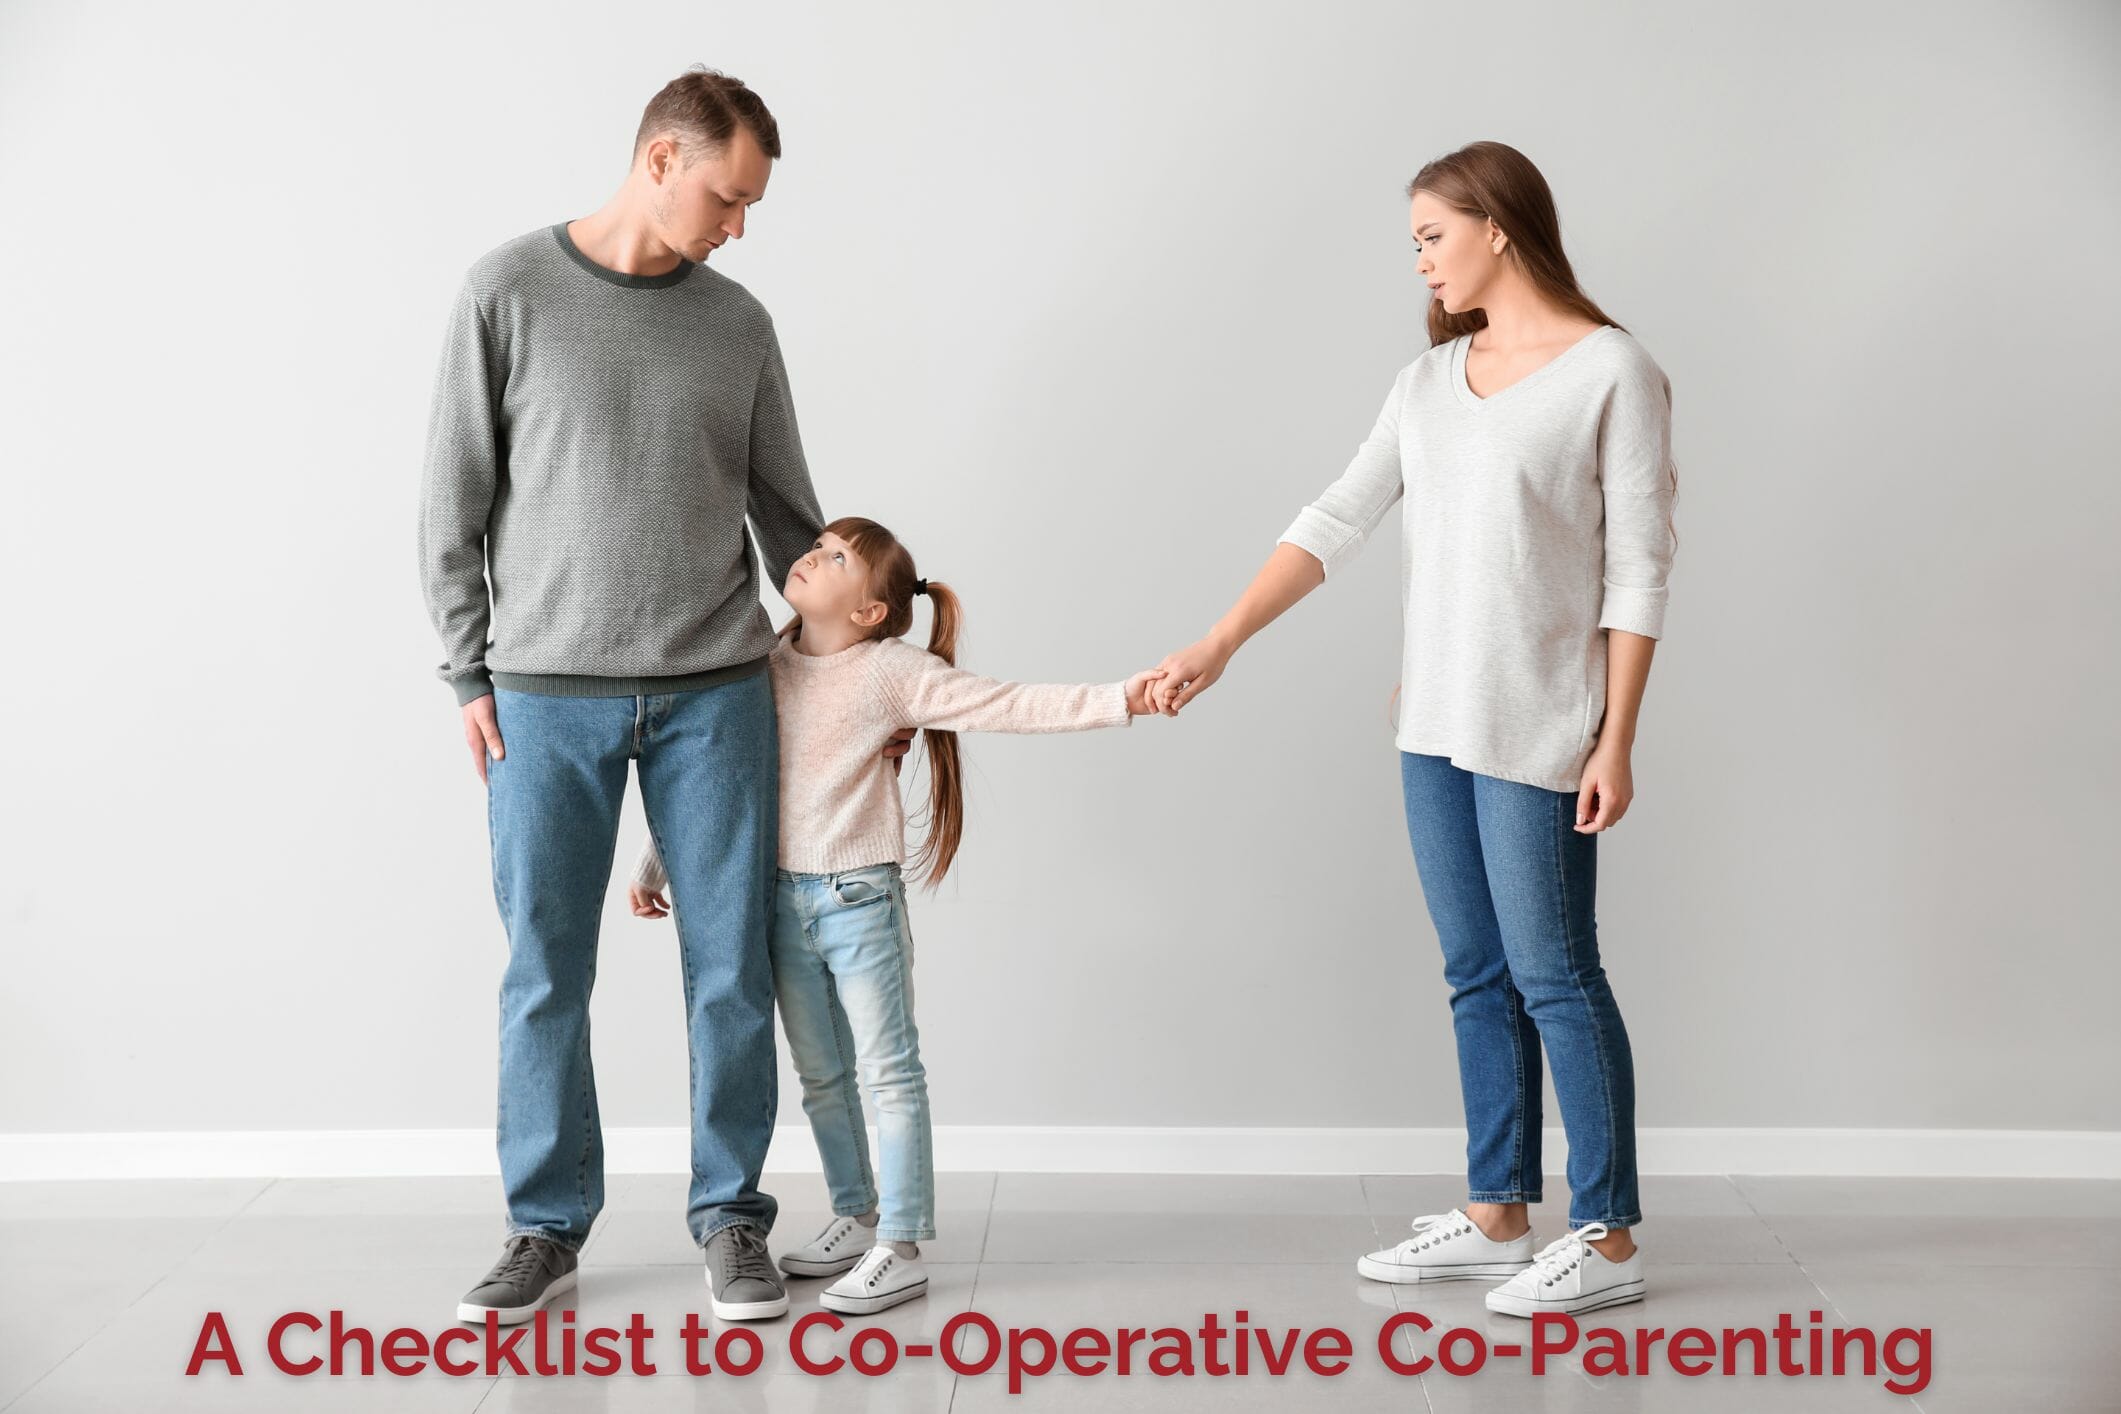 Checklist to Co-Operative Co-Parenting